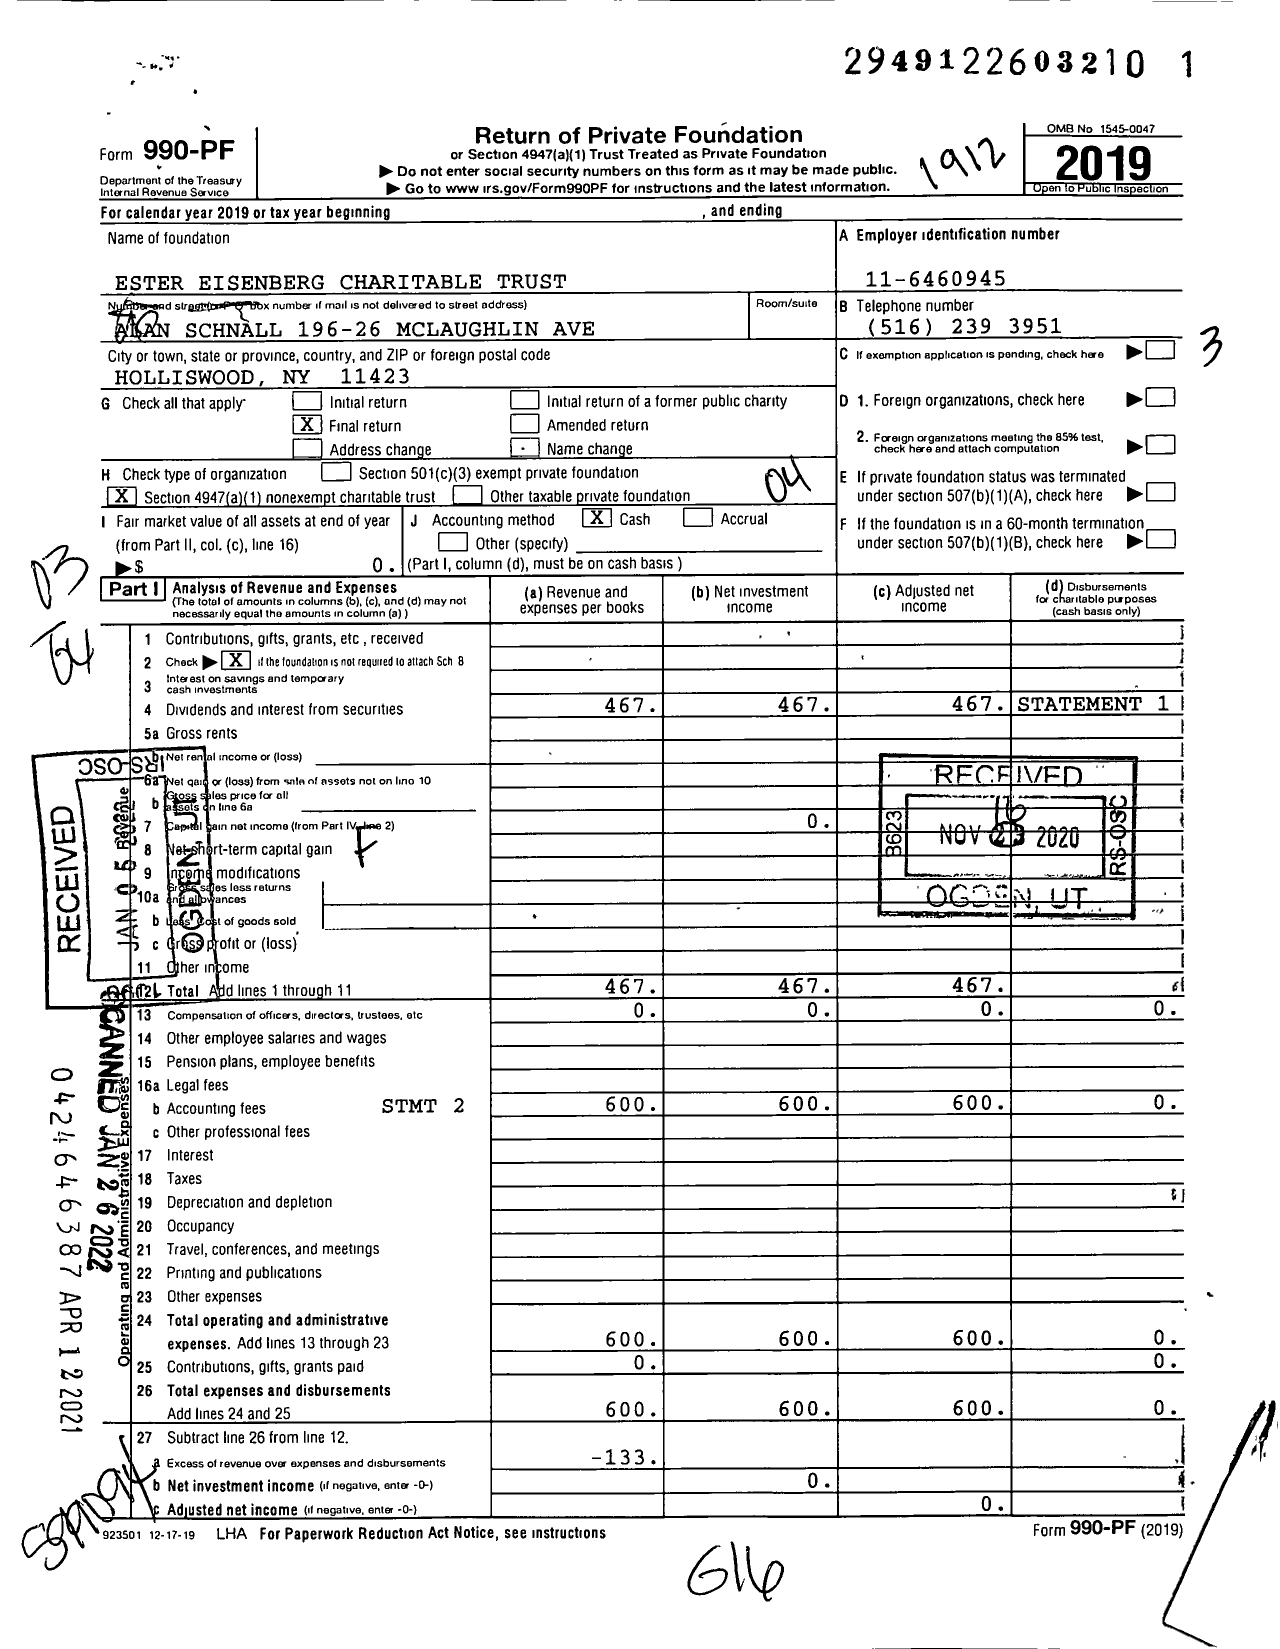 Image of first page of 2019 Form 990PF for Ester Eisenberg Charitable Trust